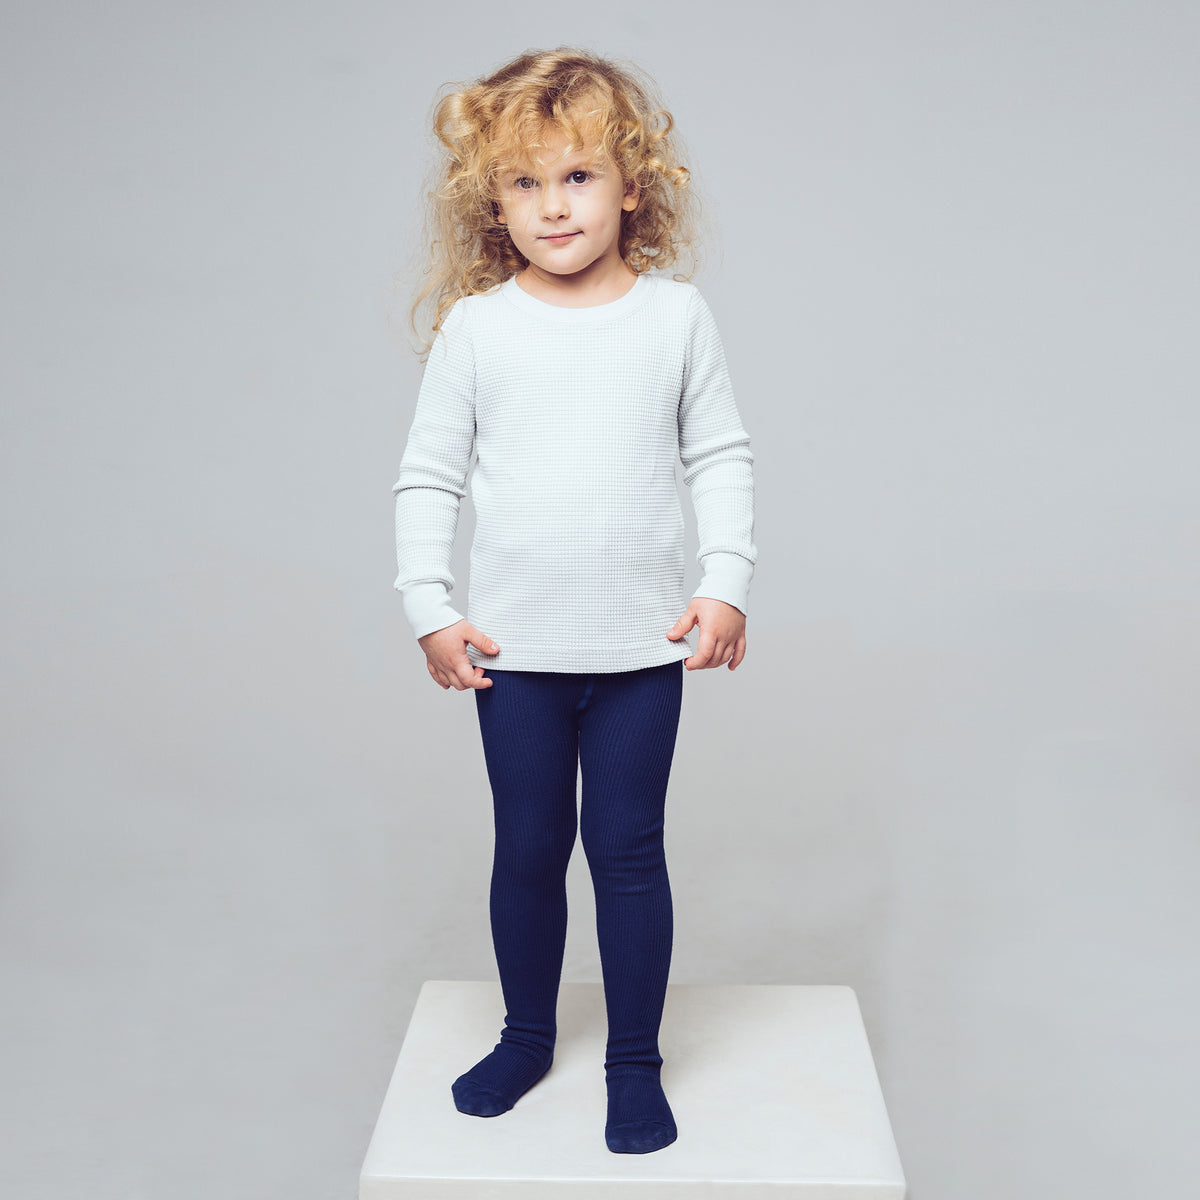 PEQNE Footed Children Tights in Navy Blue